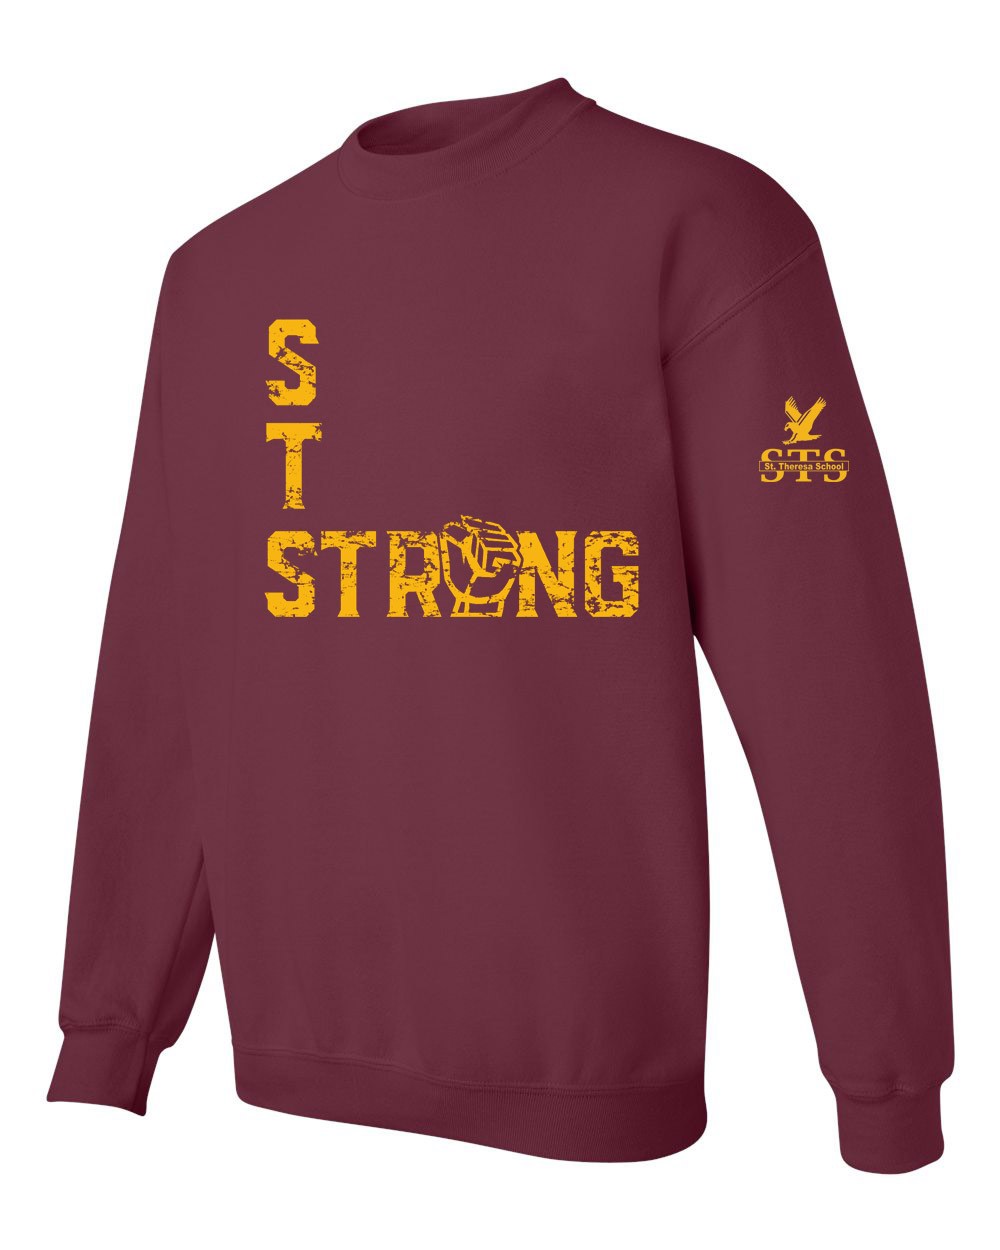 STS Staff Strong L/S Fist Spirit T-Shirt w/ Gold Logo - Please Allow 2-3 Weeks for Delivery